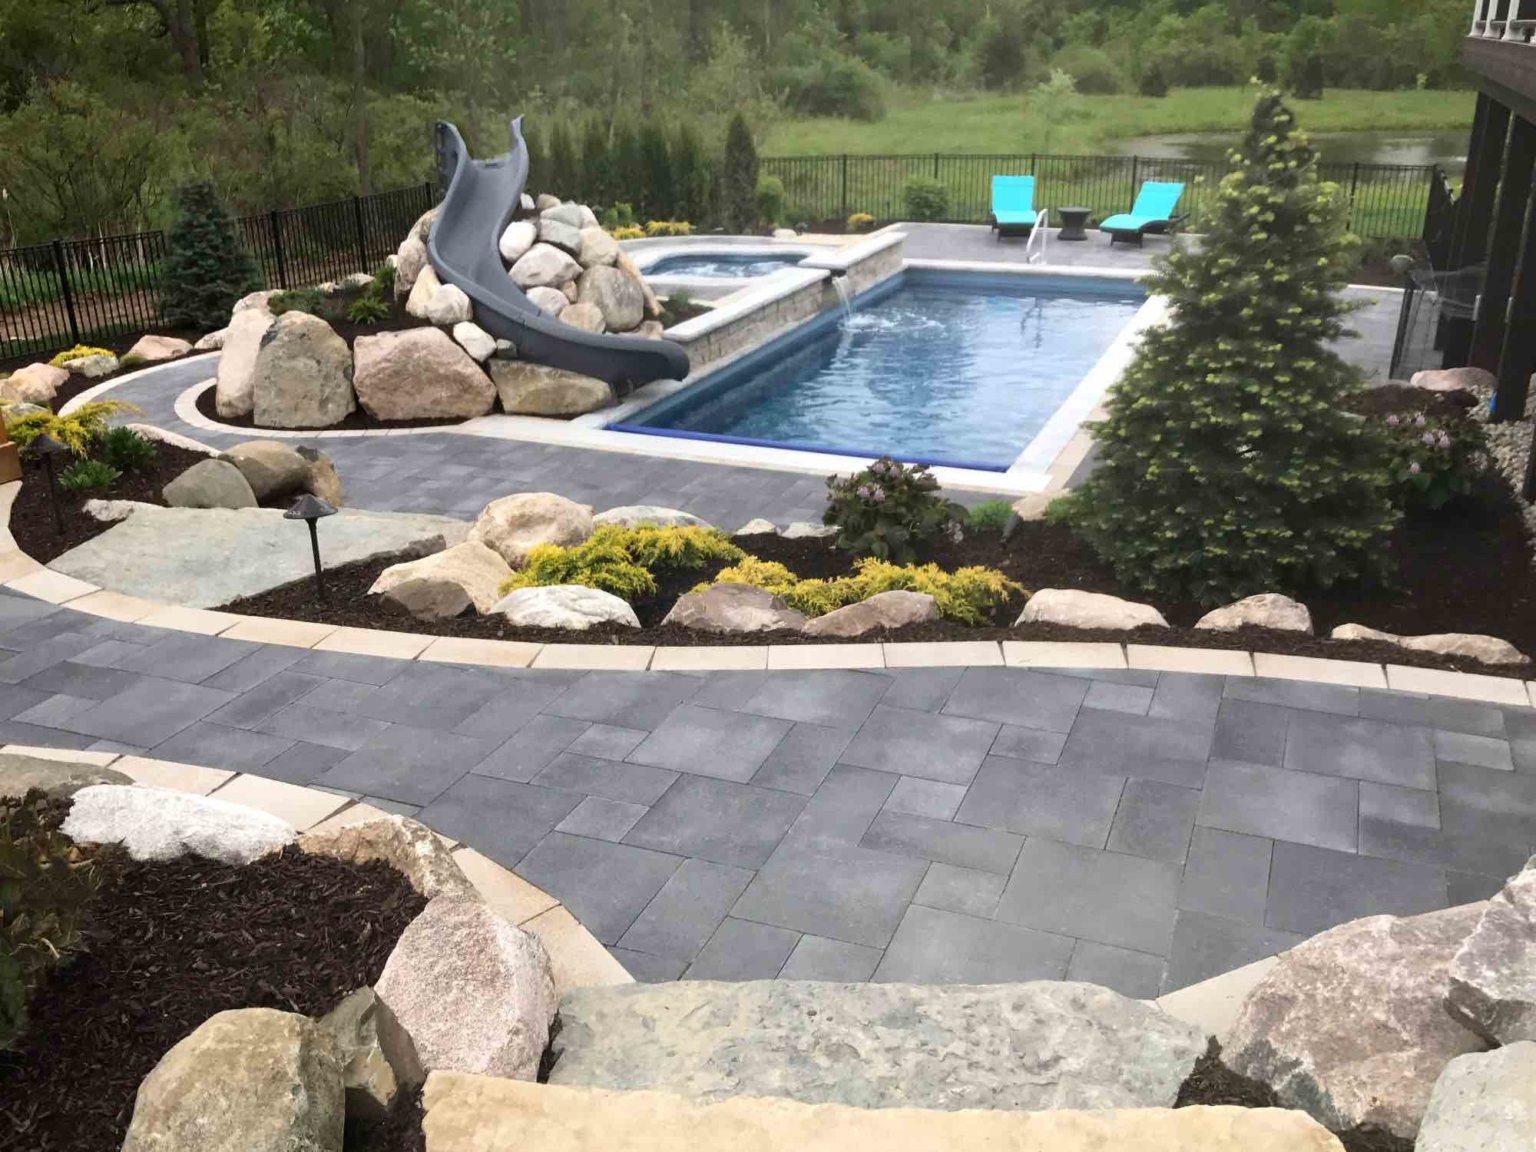 luxurious inground pool contractor in Northville, MI Rectangle fiberglass pool Pool and cascade spa michigan custom pools and spas Sustainable Landscape Design Michigan Michigan Landscaping Ideas Michigan Hardscape Design Award-Winning Landscape Design Michigan